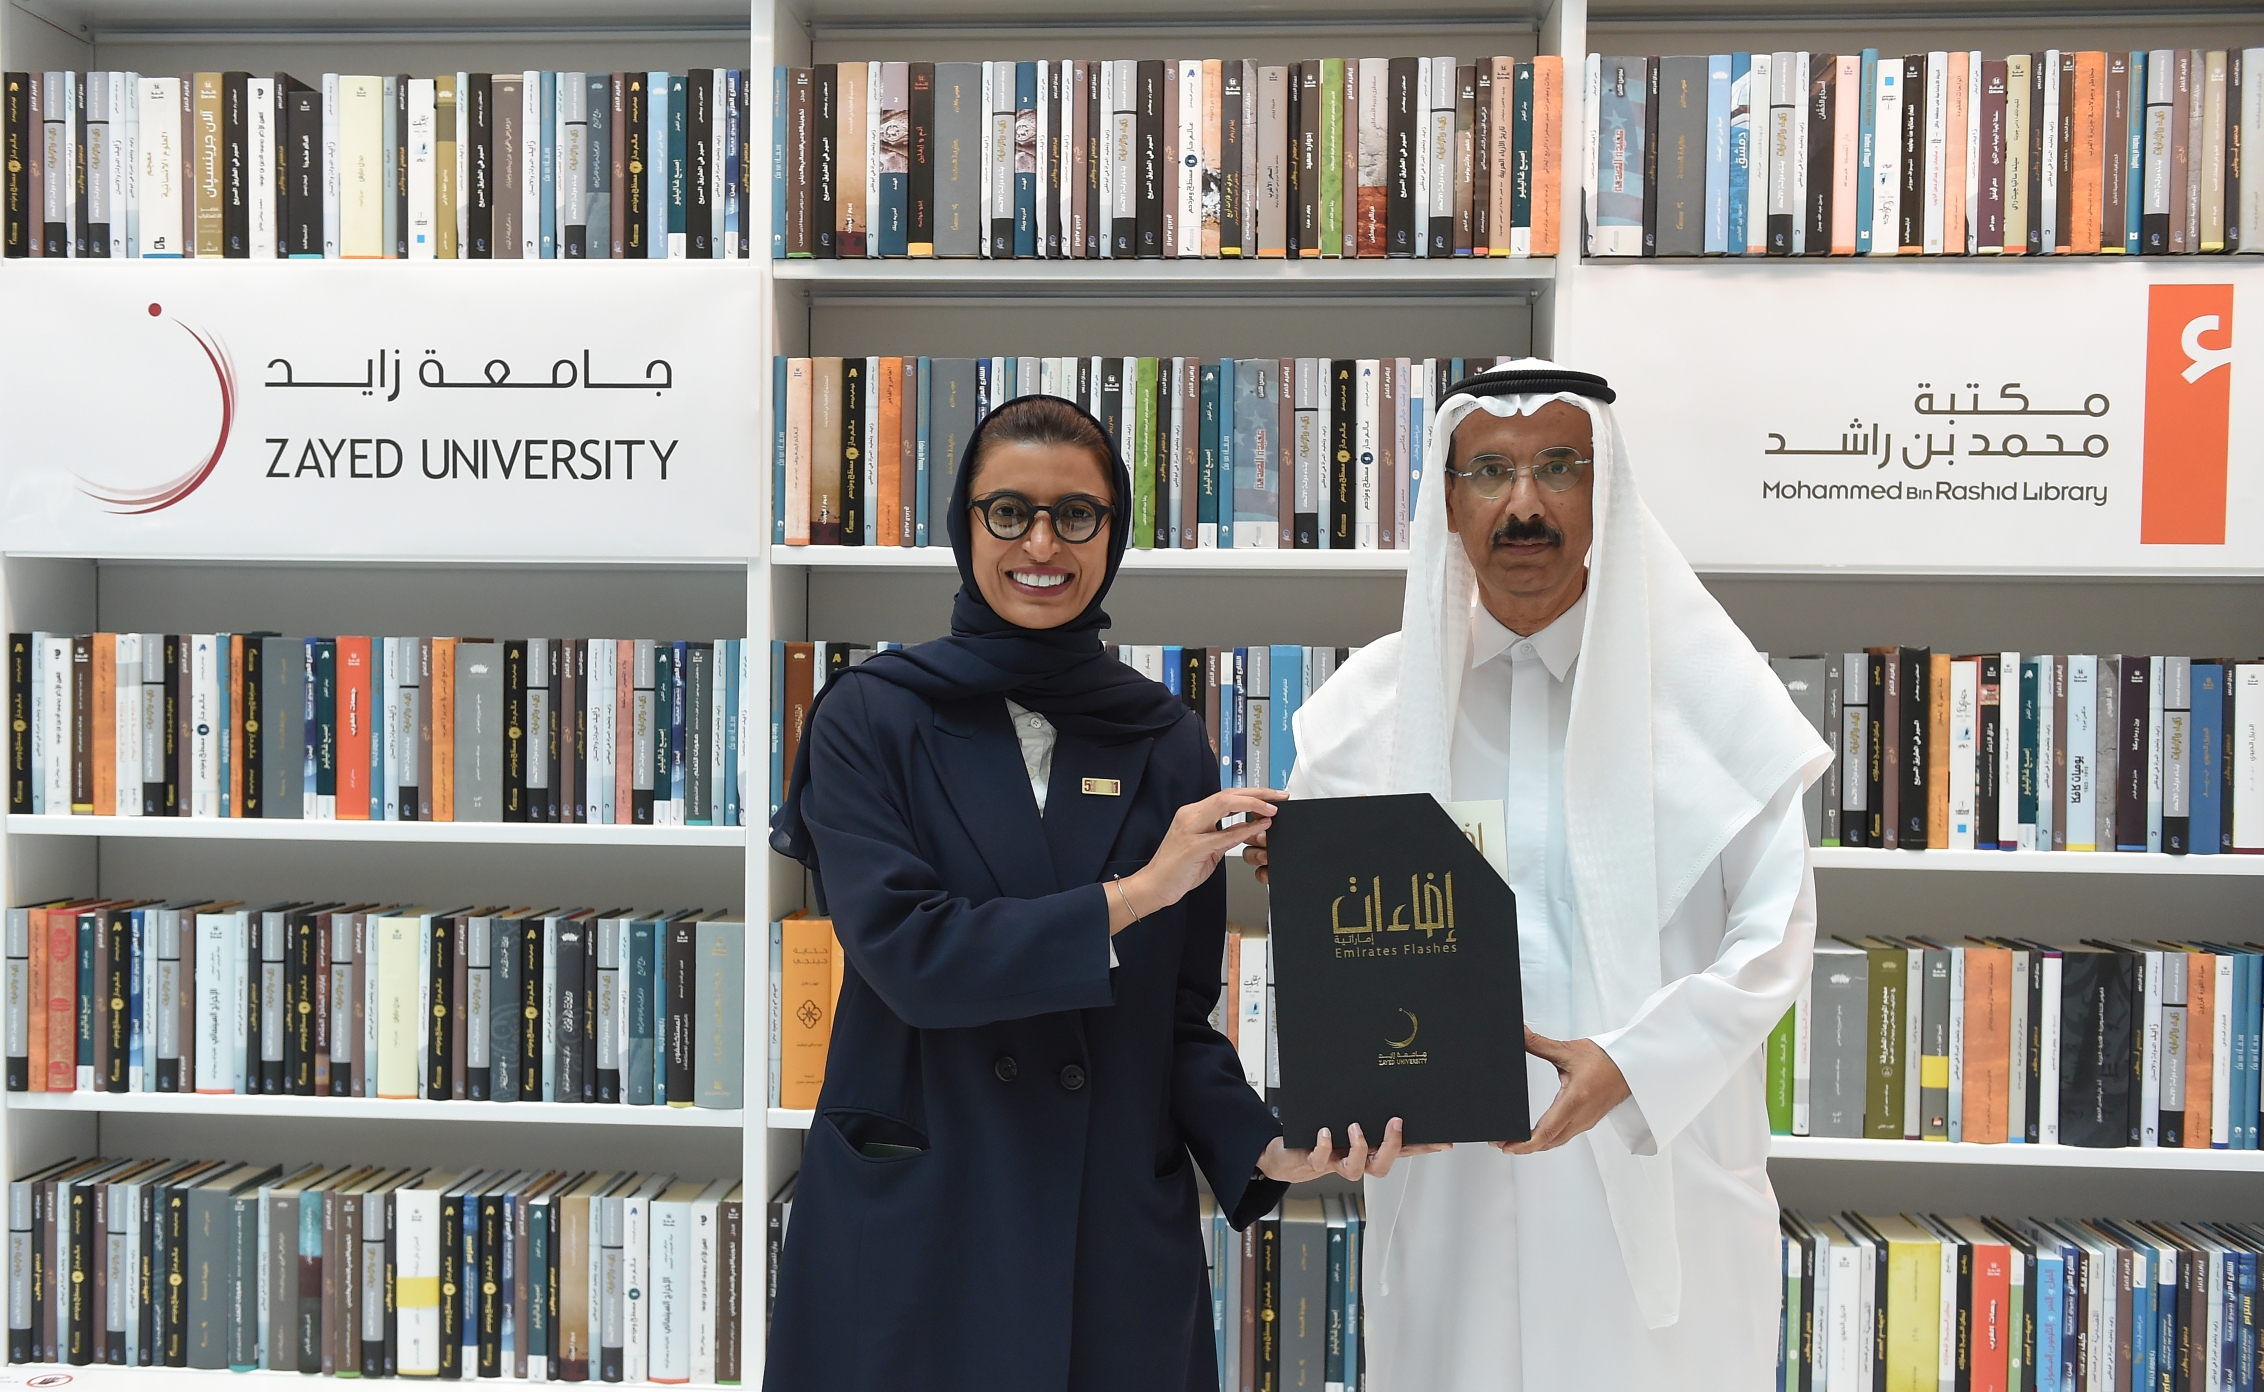 Partnership with Mohammed Bin Rashid Library will “stimulate a passion for knowledge” in Zayed University students